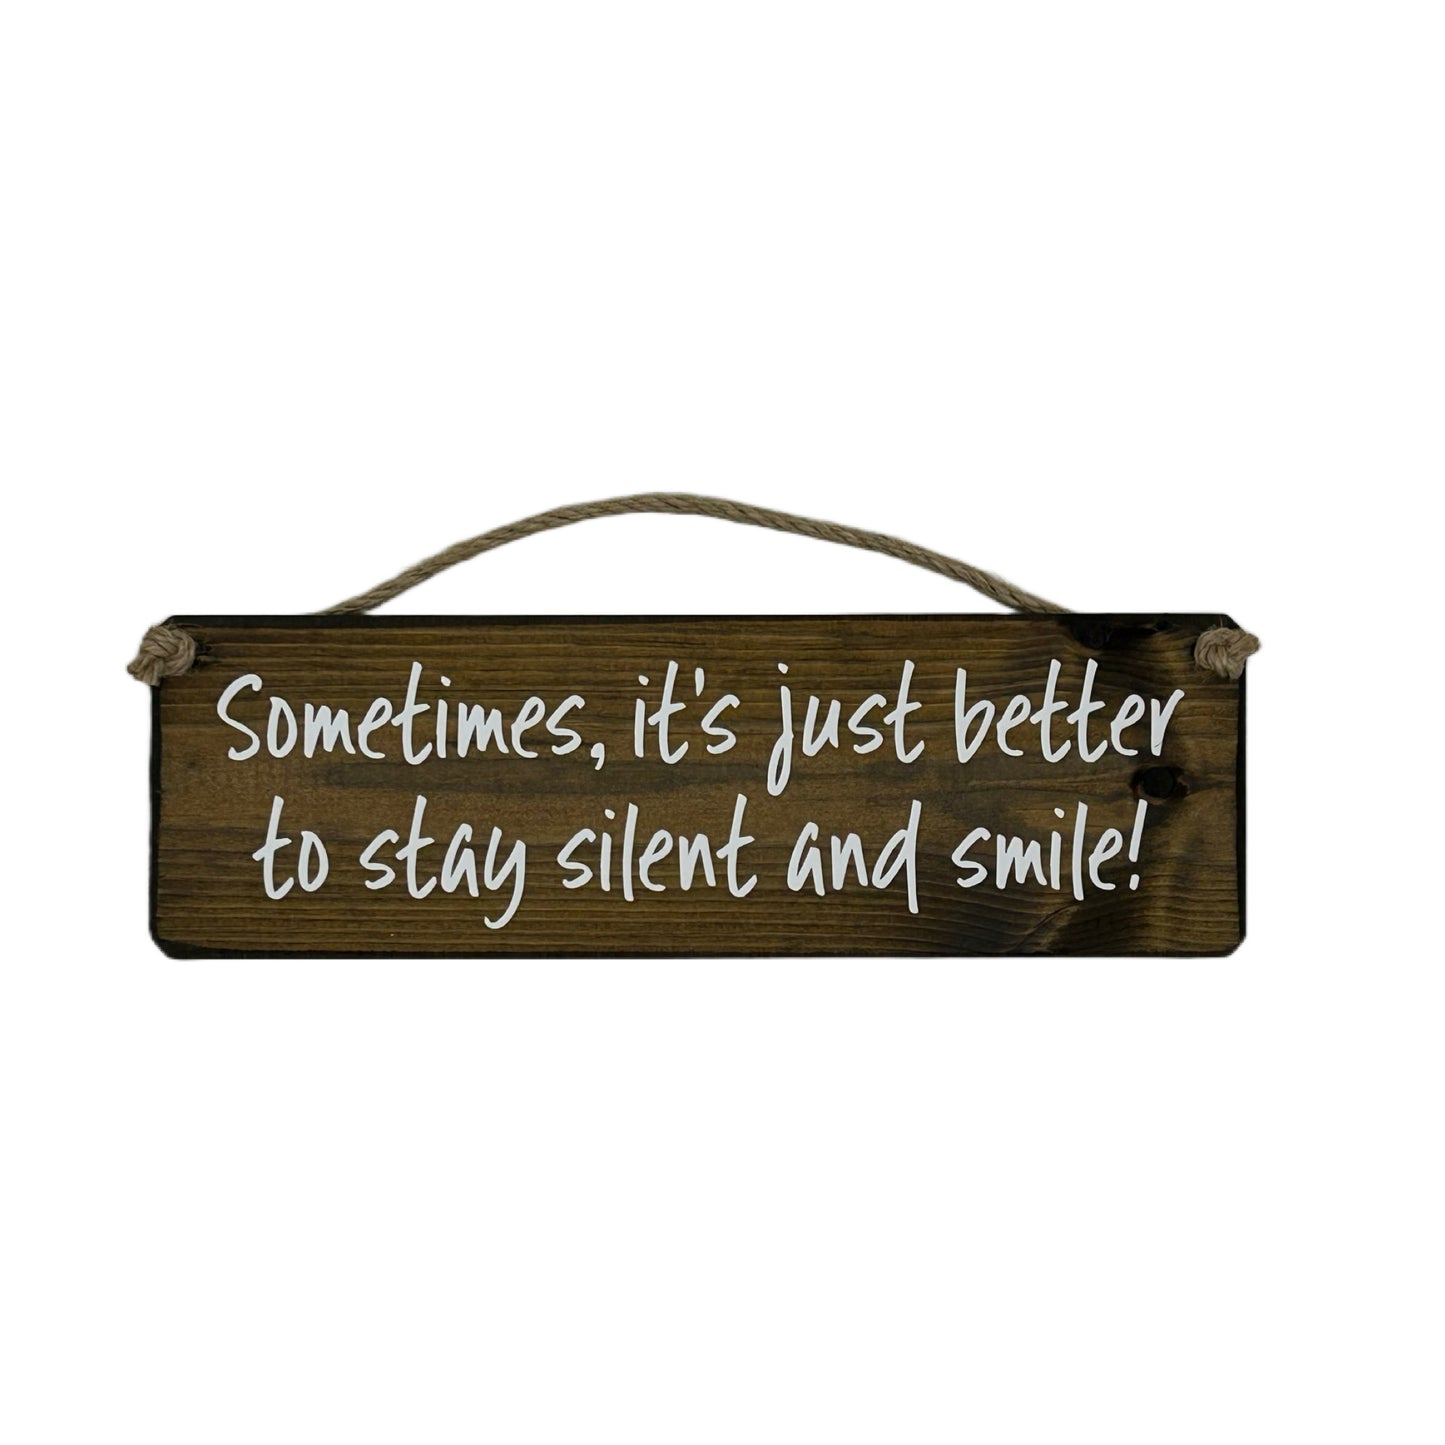 Sometimes it's just better to stay silent and smile.